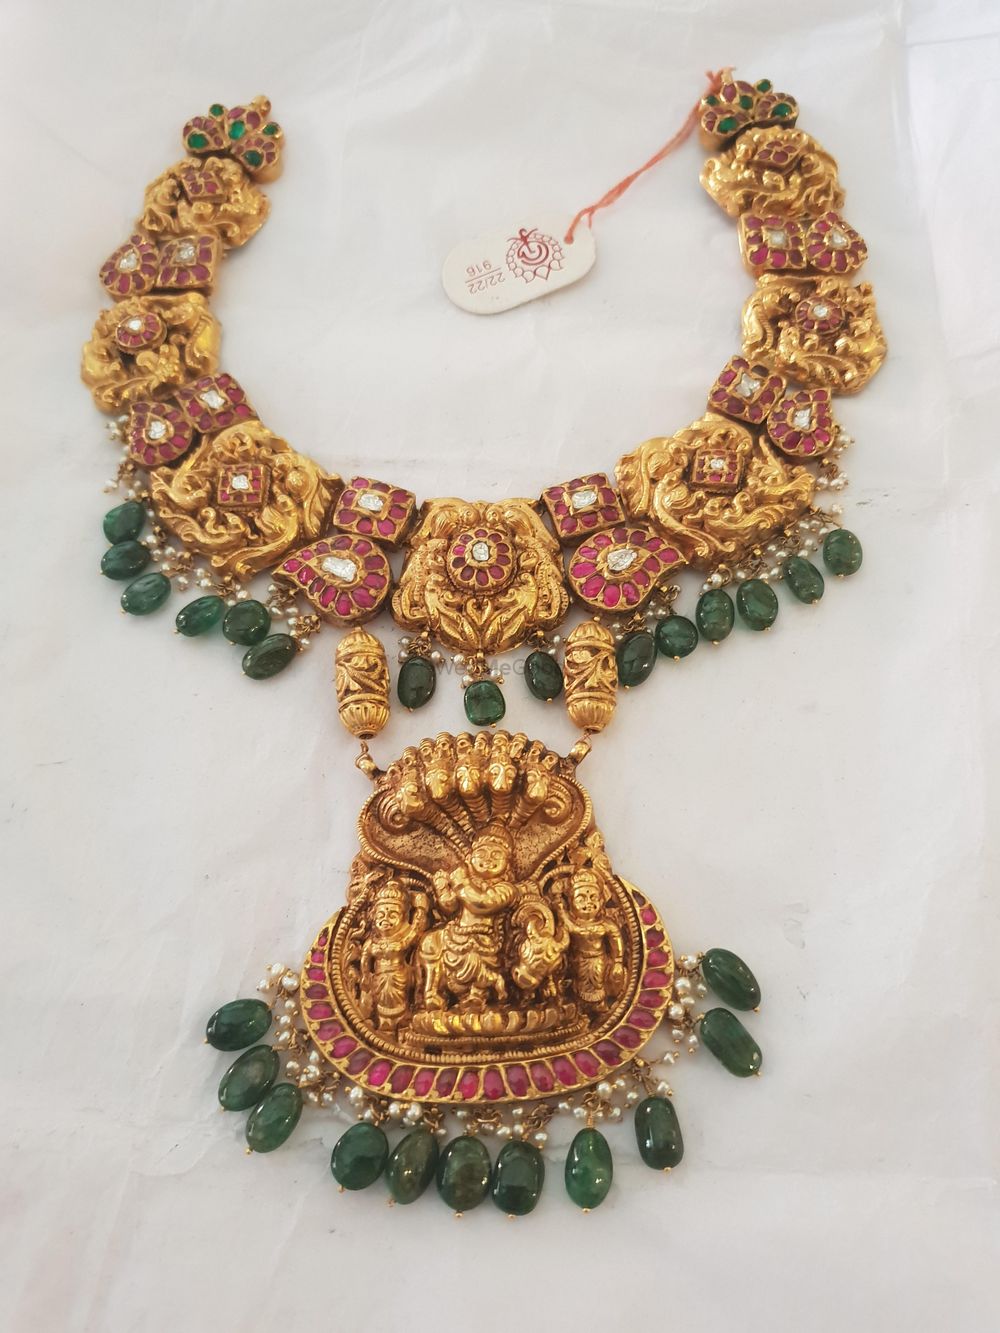 Photo From Necklace Sets - By Gordhandas Nandkishore Sarraf & Jewellers